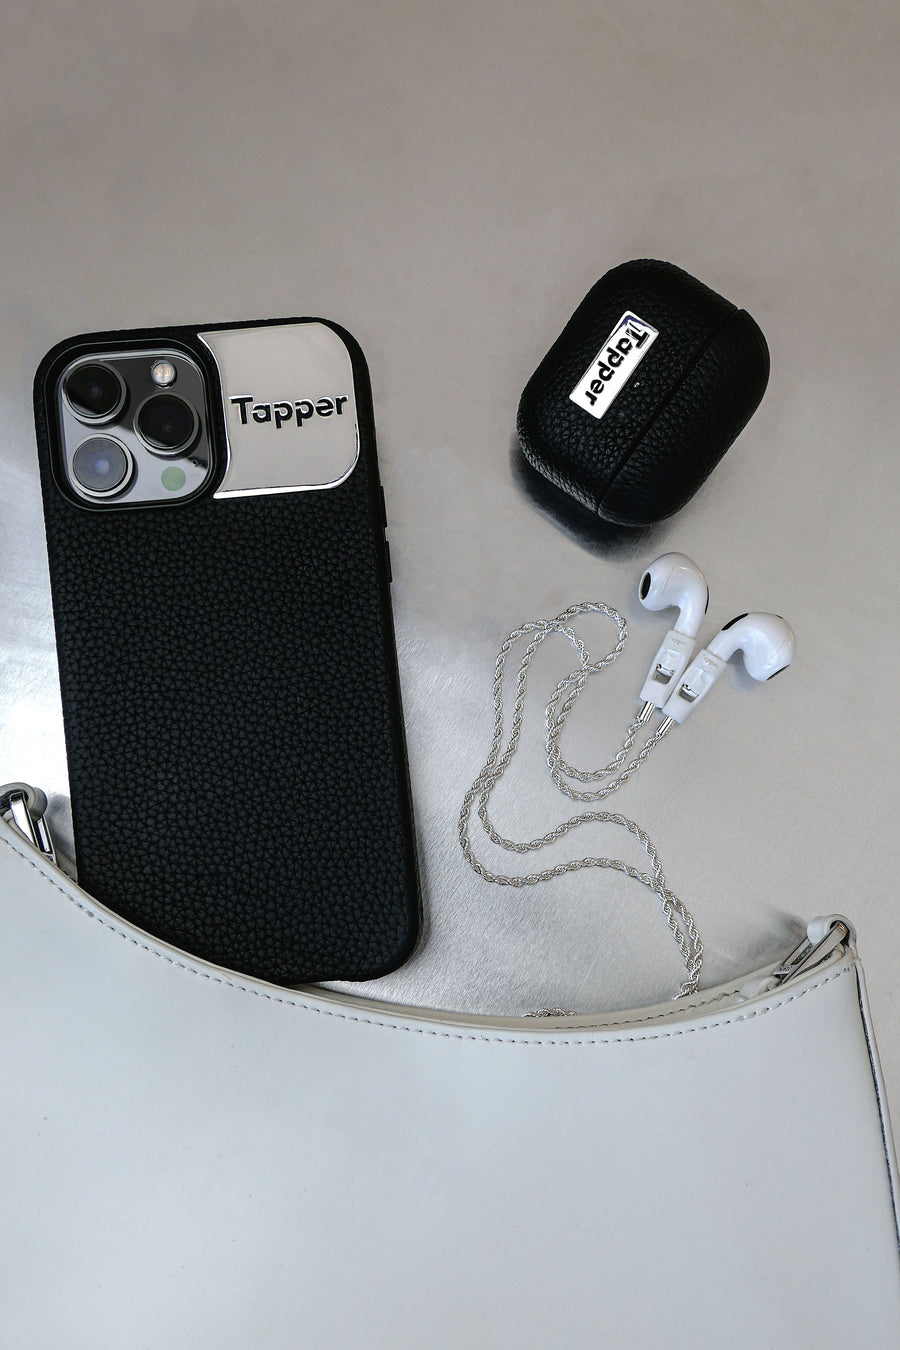 Tapper's luxurious black genuine cow leather AirPods case protects and elevates the look of your AirPods. The luxurious, protective case for AirPods with a metal logo plate colored in silver steps up your AirPods game. The next must-have high end protective Apple AirPods accessory in real leather with metal details. Compatible with AirPods (3rd generation). Designed in Sweden by Tapper. Free Express Shipping at gettapper.com